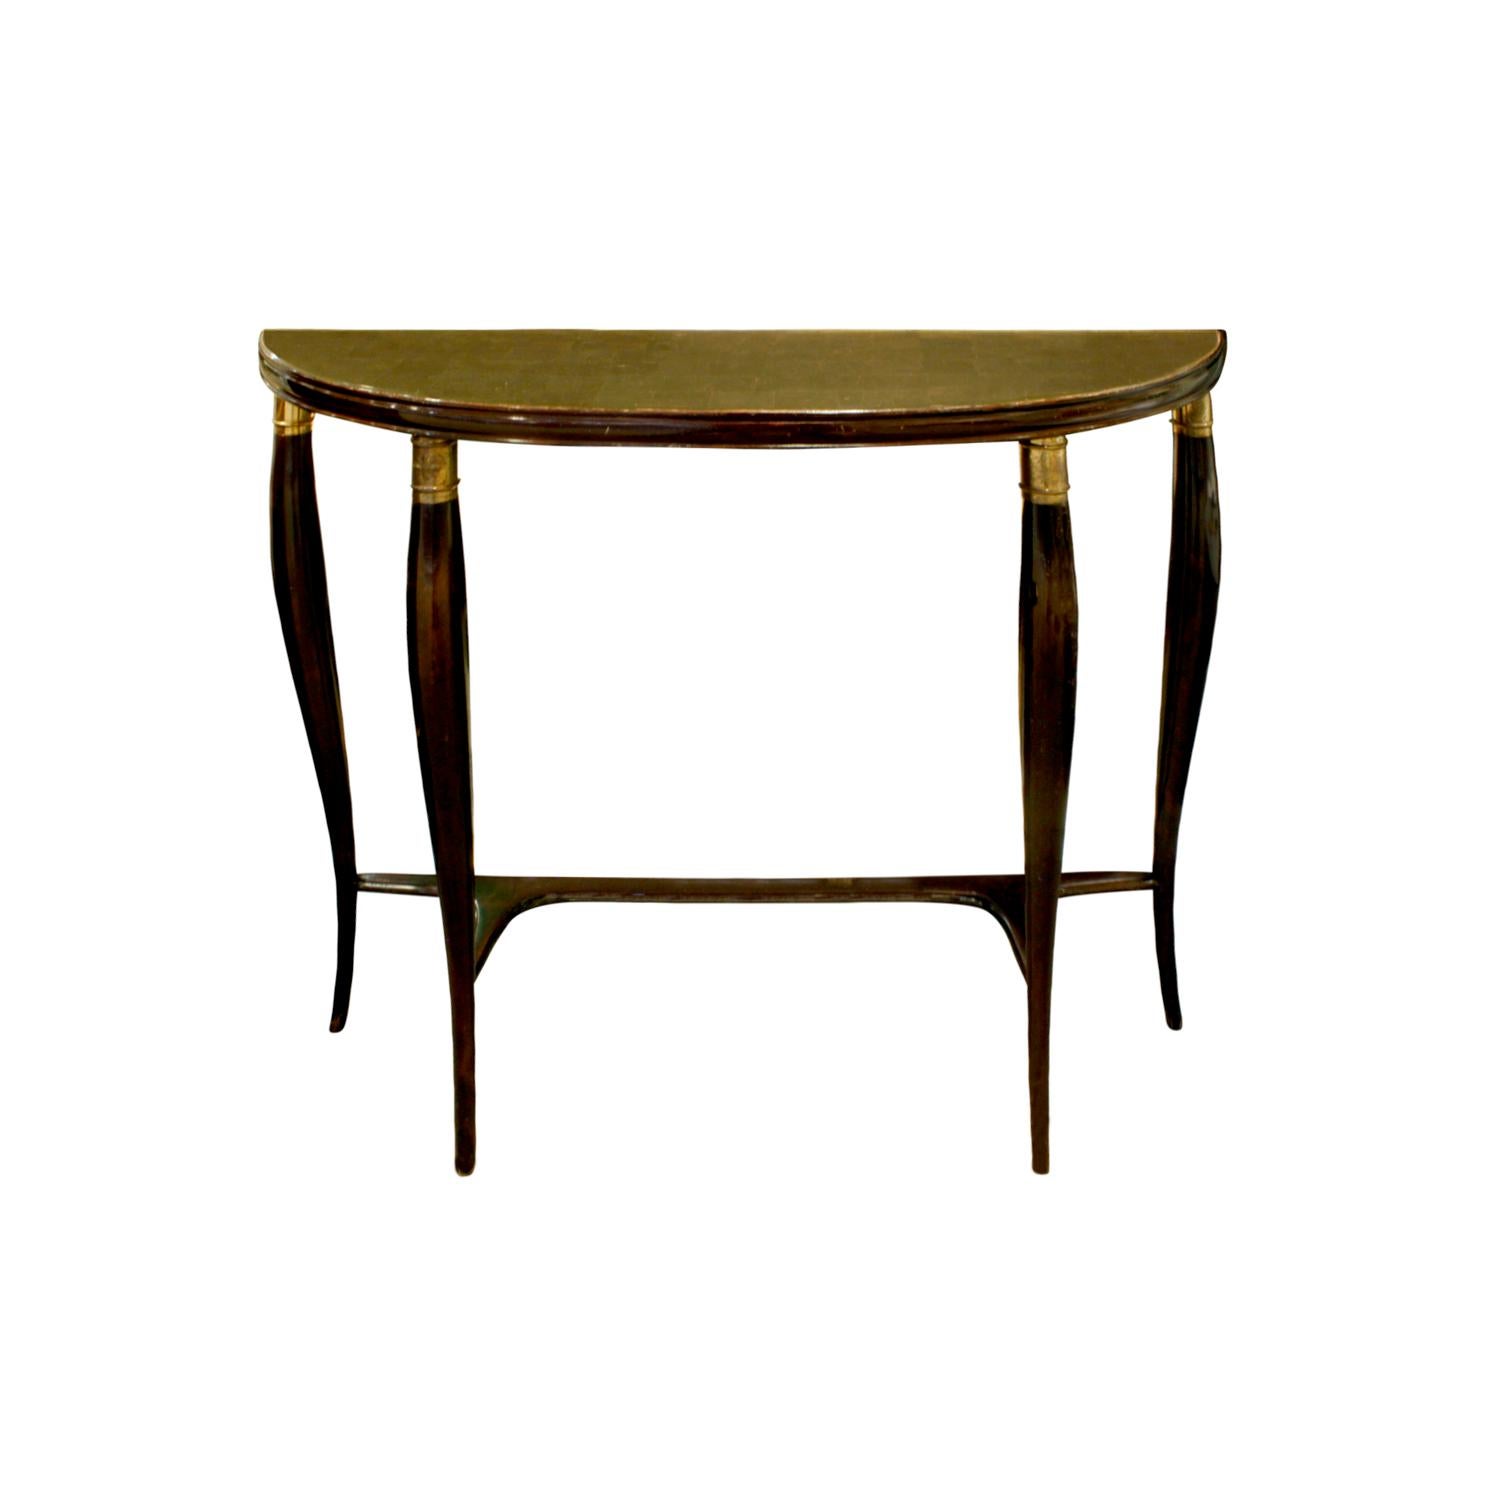 Elegant Demilune Shaped Console with Gilt Glass Top, 1950s